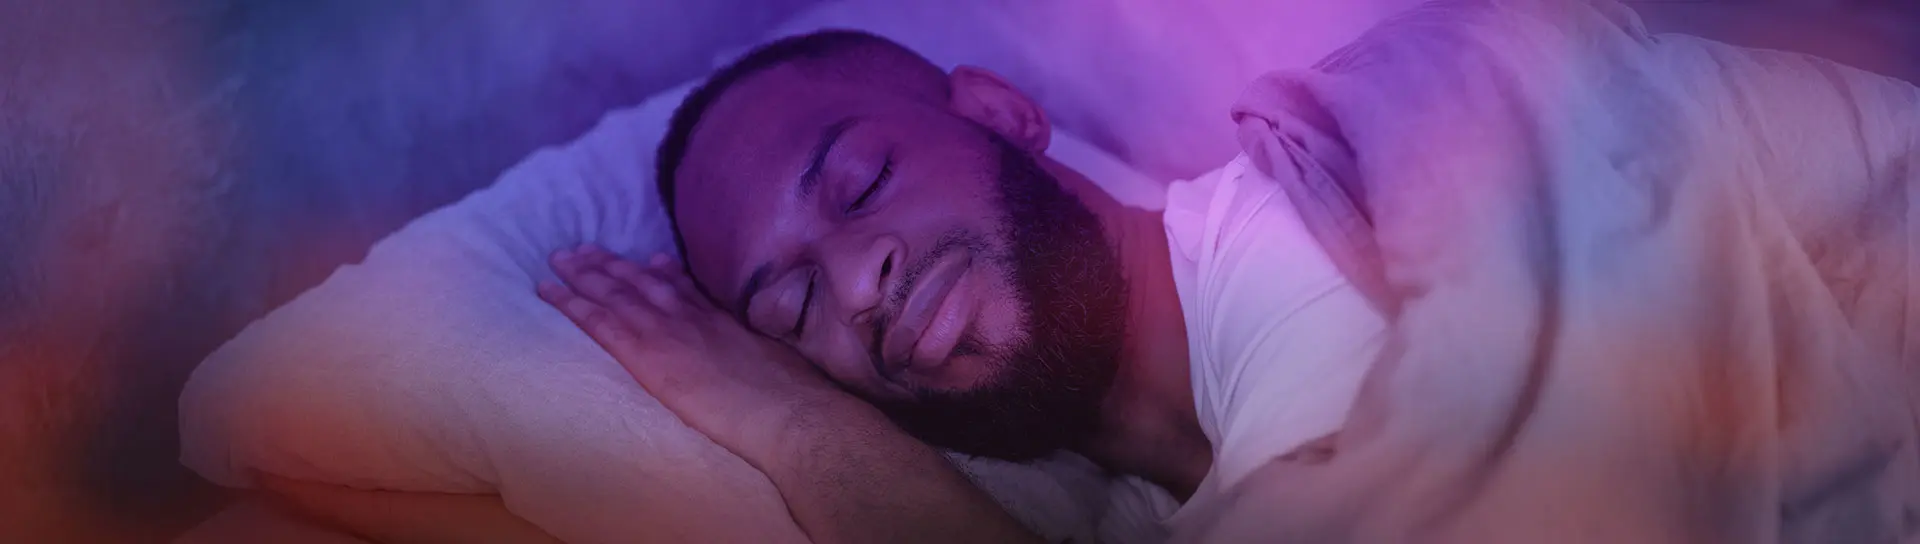 Portrait of young African American man lying in bed with closed eyes, resting in bedroom on the side.